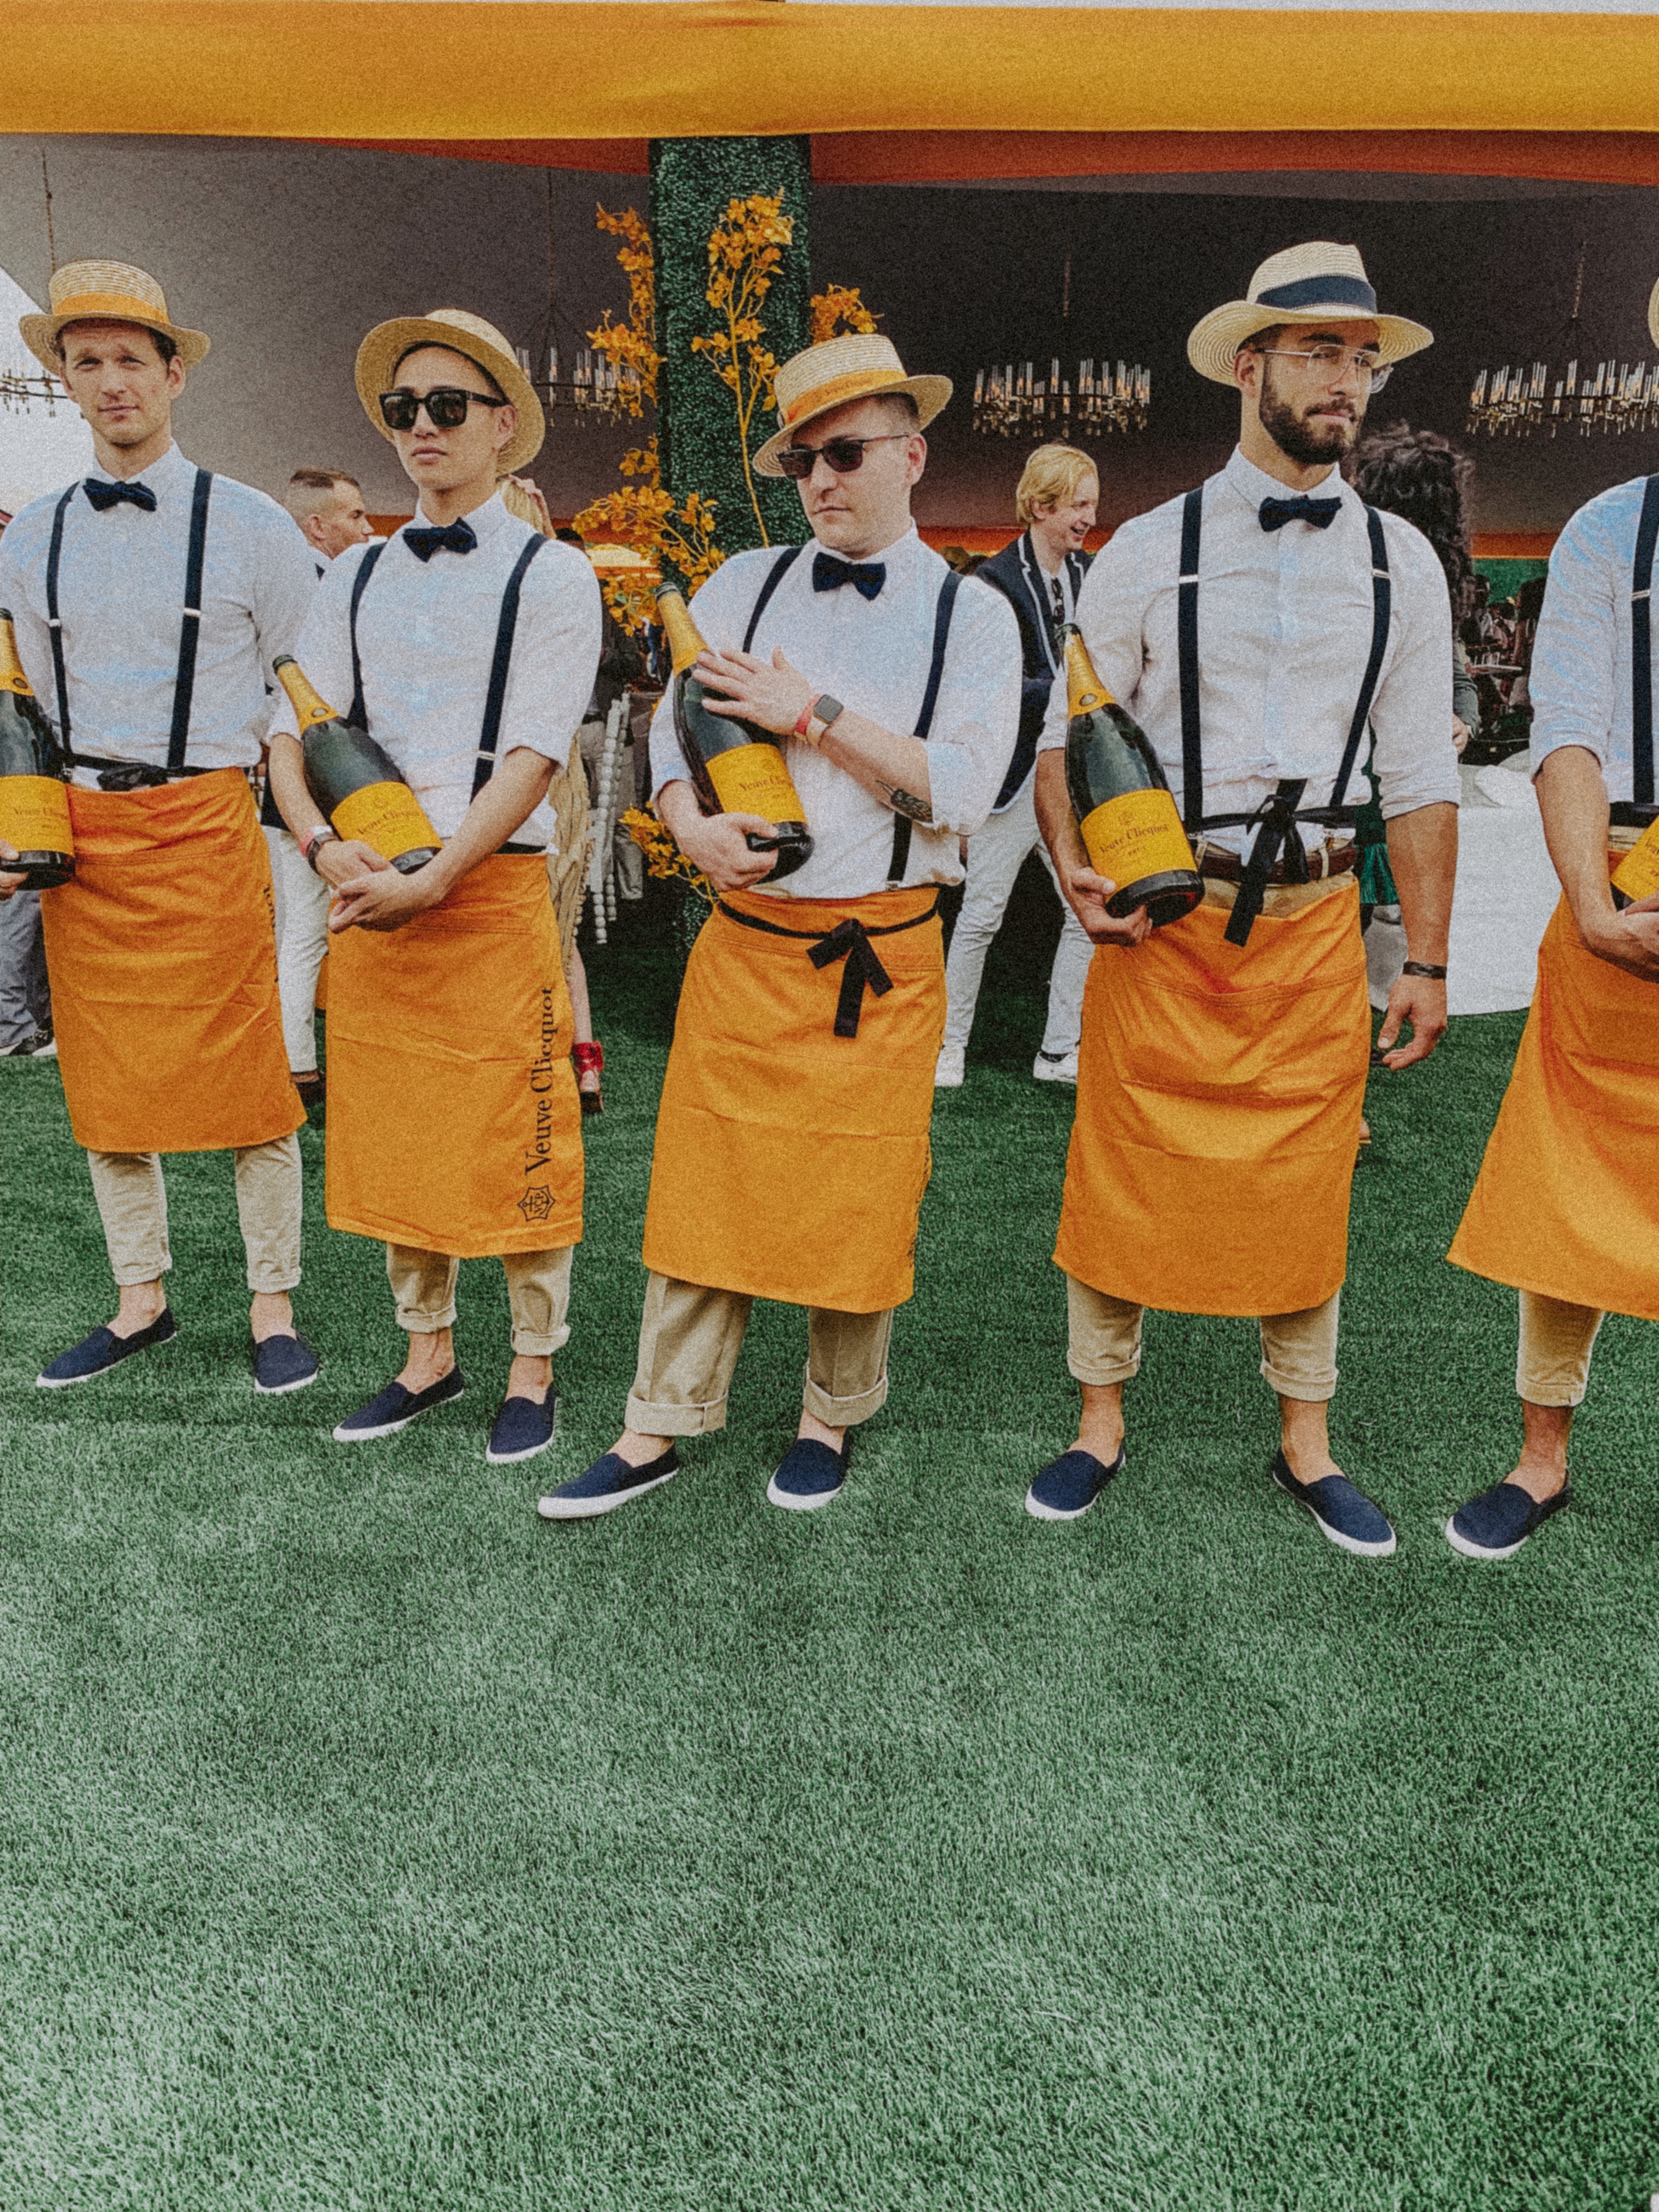 The Best Dressed at Veuve Clicquot's 12th Annual Polo Classic